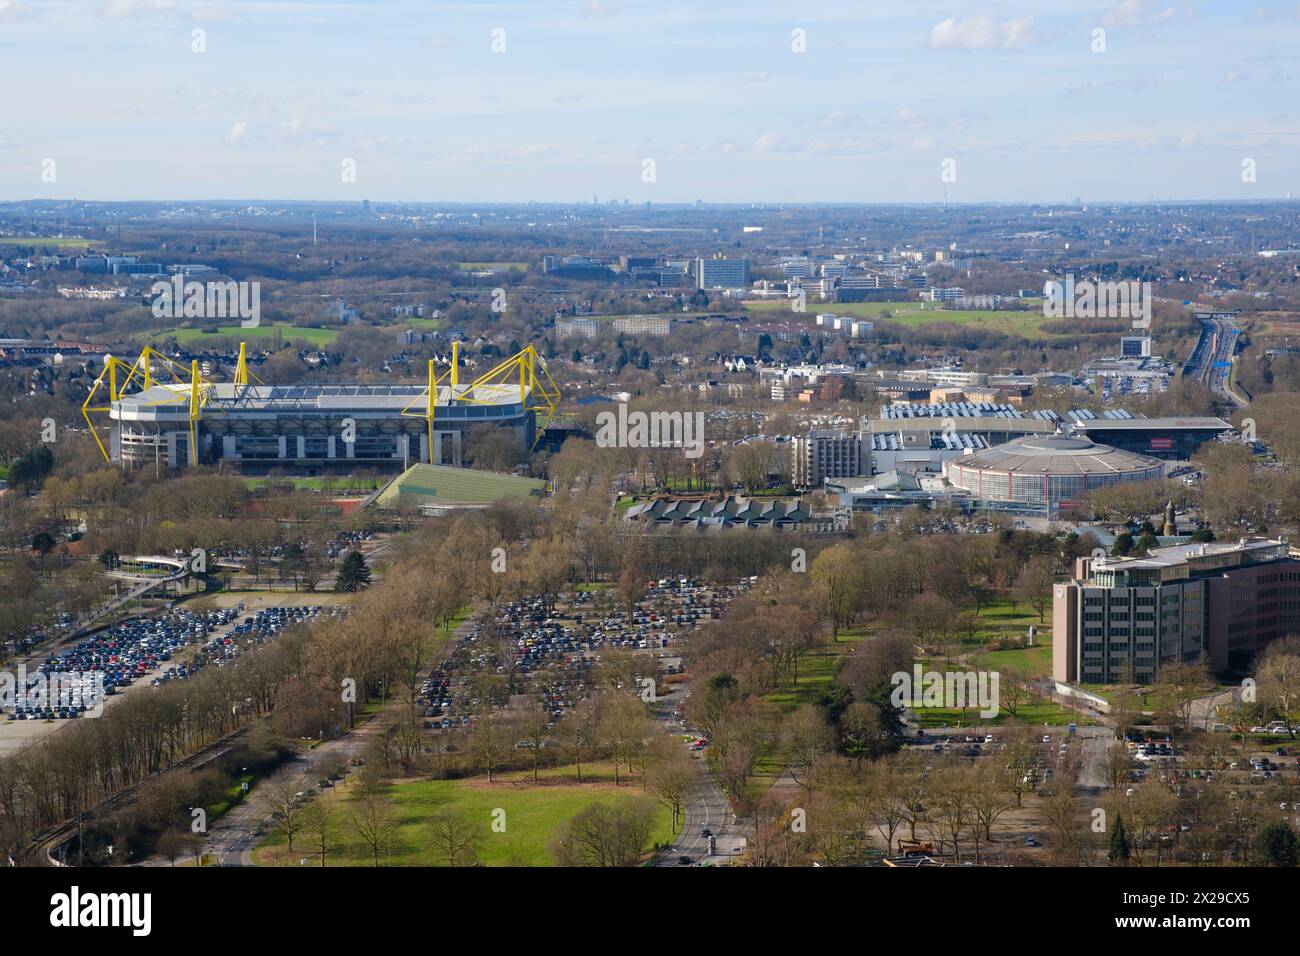 View from above to the city of Dortmund Stock Photo